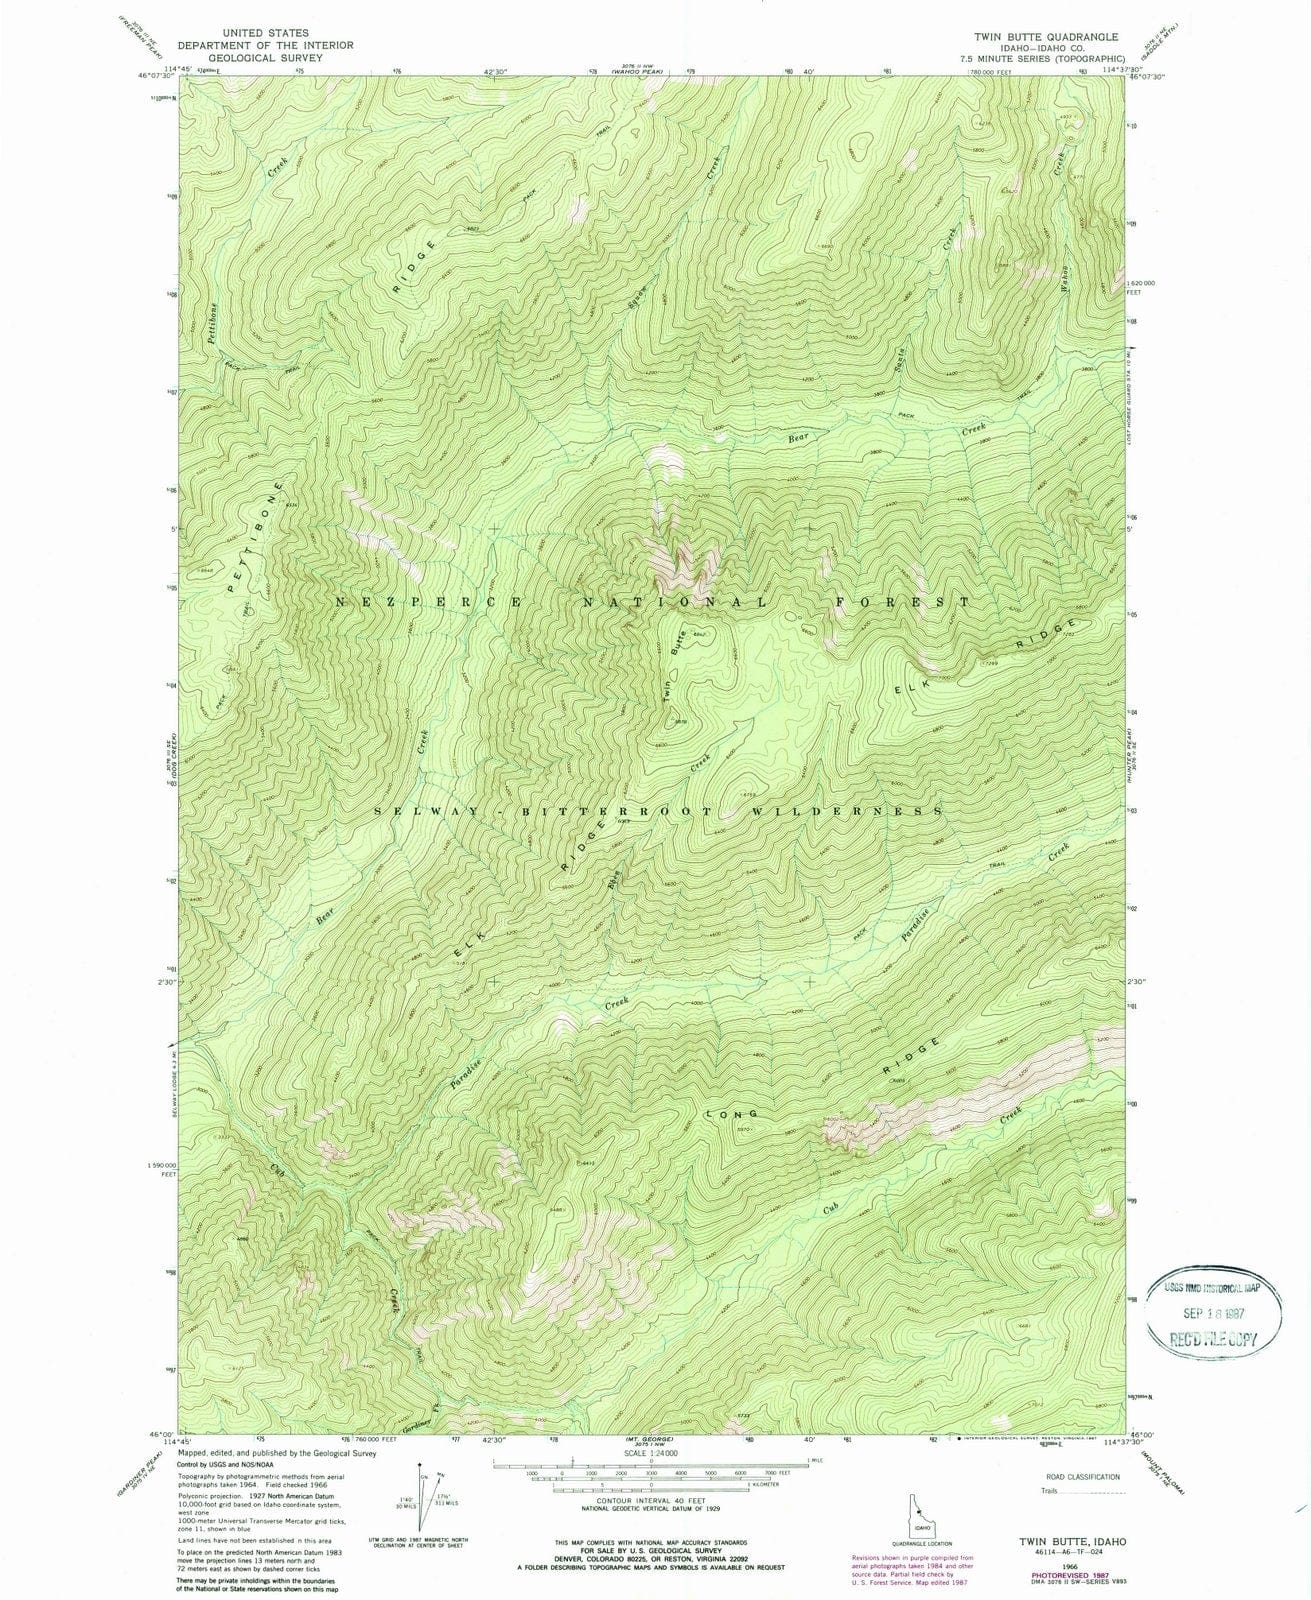 1966 Twin Butte, ID - Idaho - USGS Topographic Map